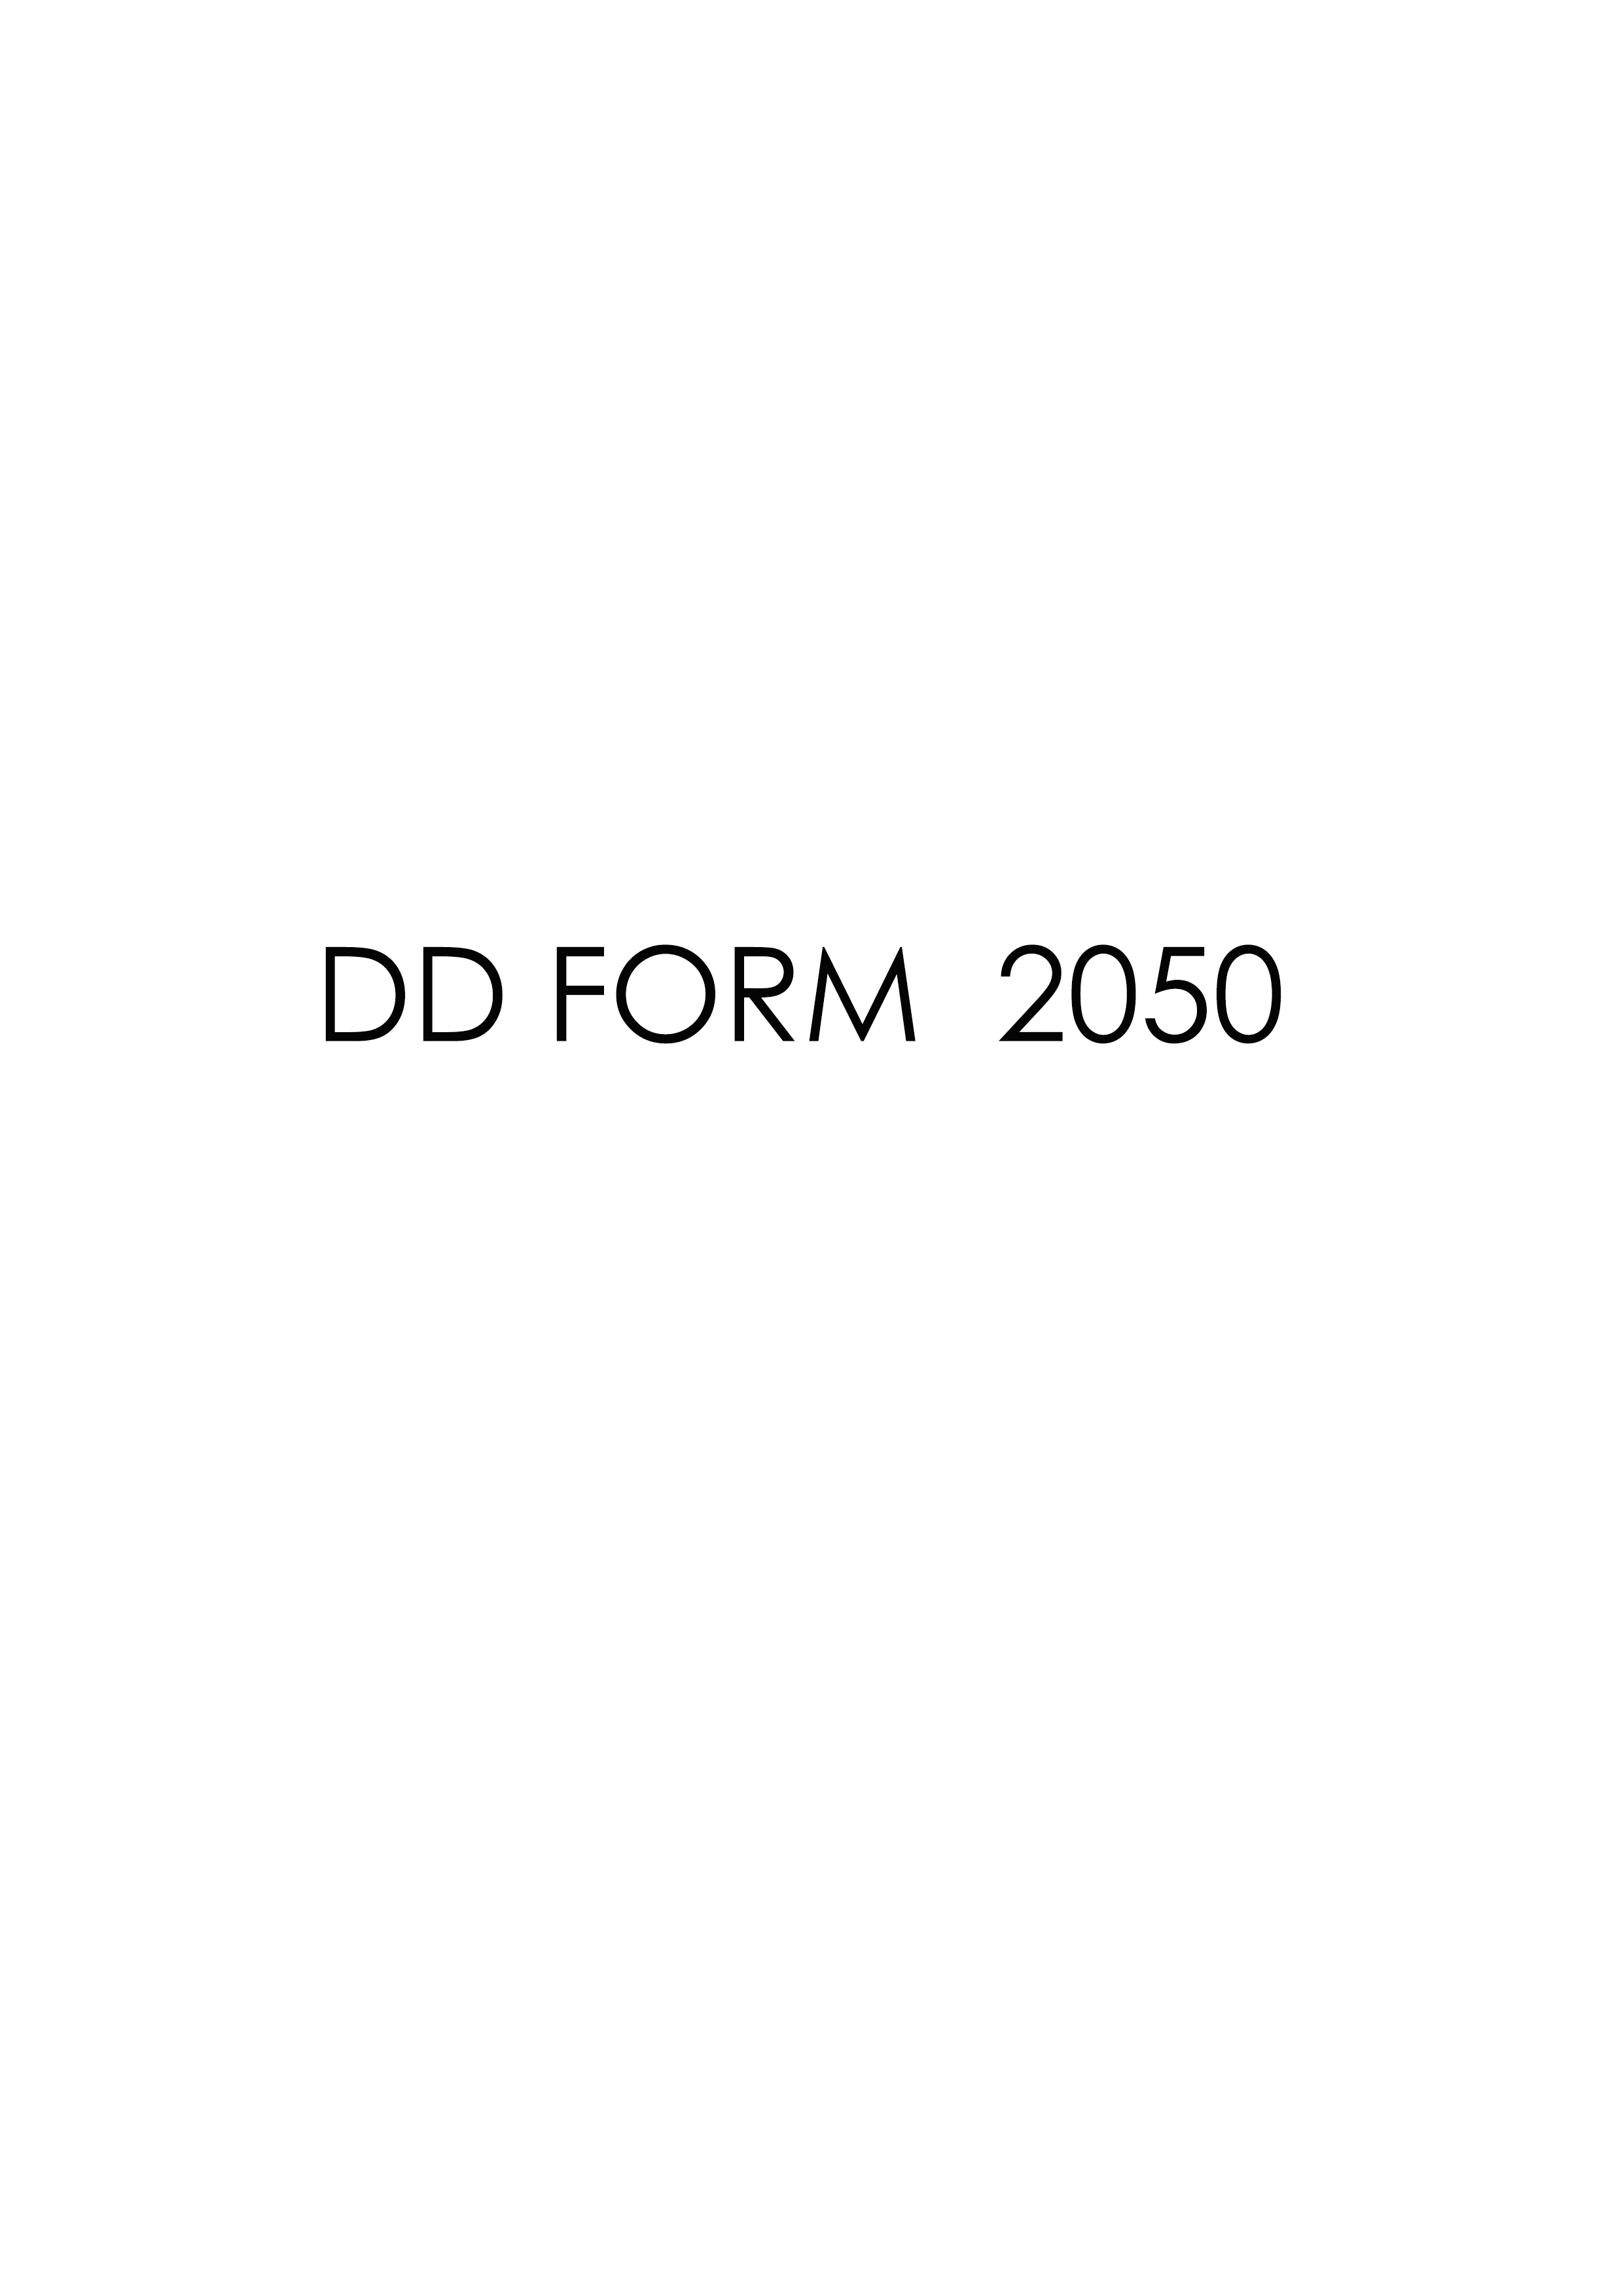 Download Fillable dd Form 2050